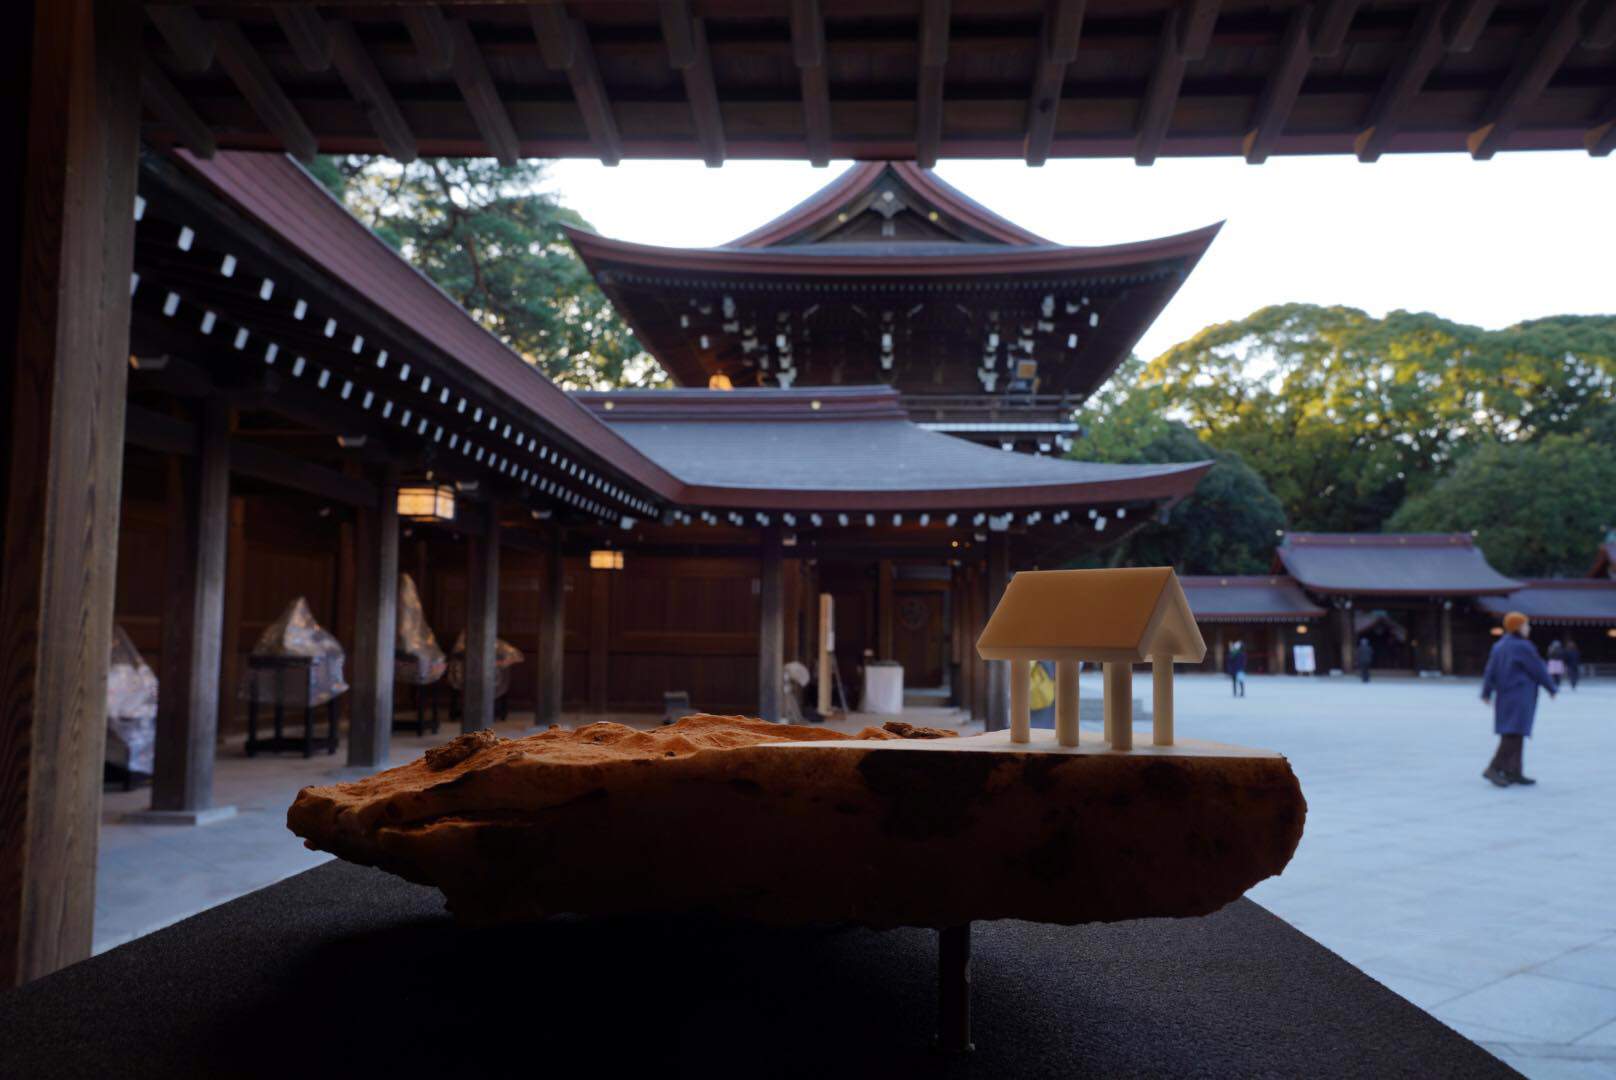 Japanese sculptors working with Apuan marble on display at Tokyo's Meiji Temple